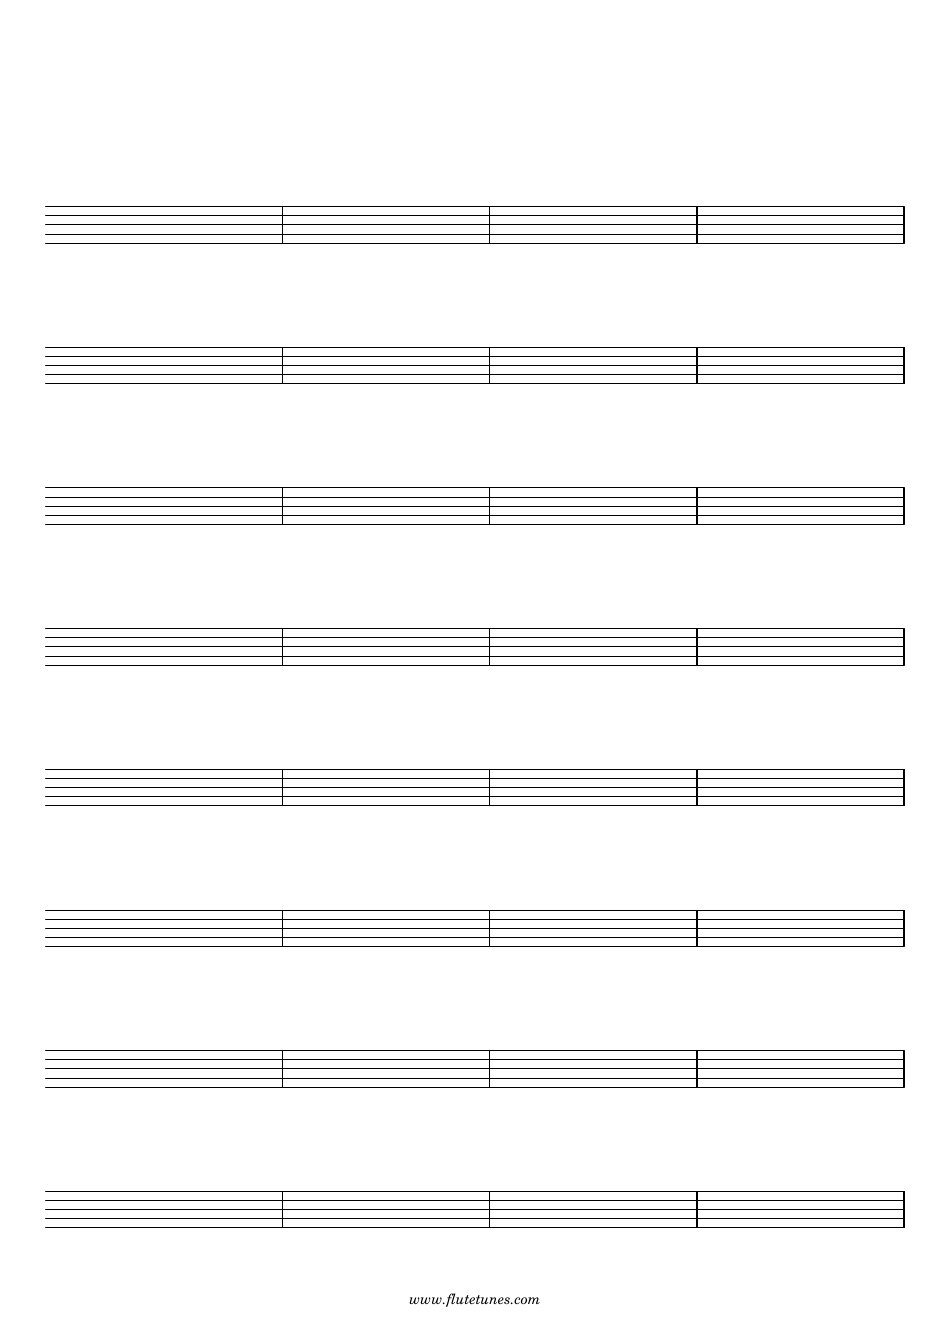 Blank Staff Paper with 8 Staves and 32 Bars per Page